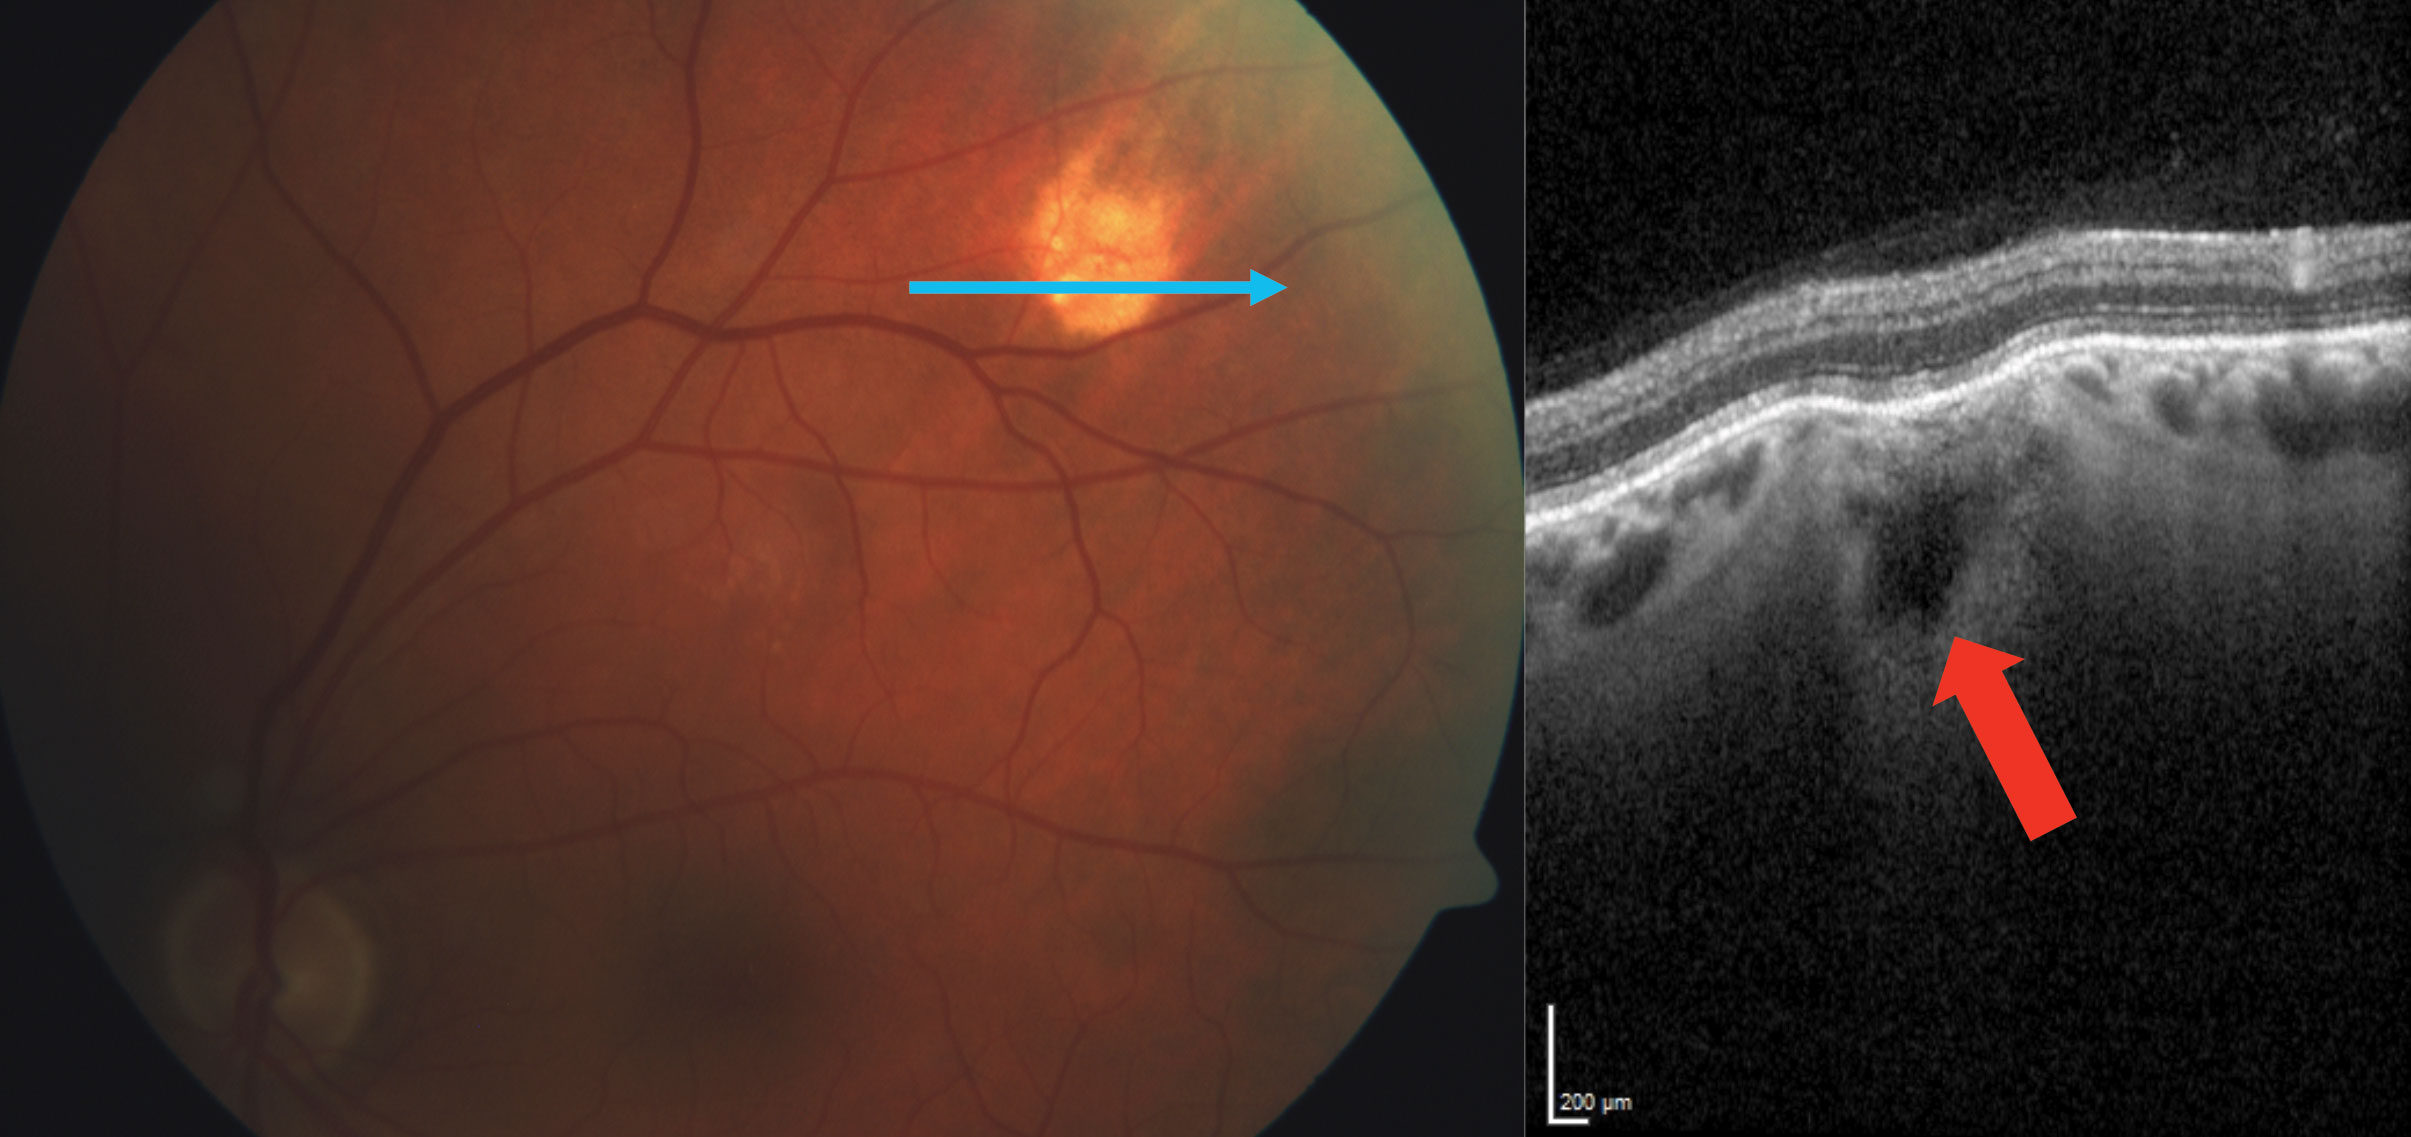 Another SCC patient exhibits a Type 3 “rocky-rolling” appearance. The red arrow shows the extensive choroidal thinning above the scleral mass.